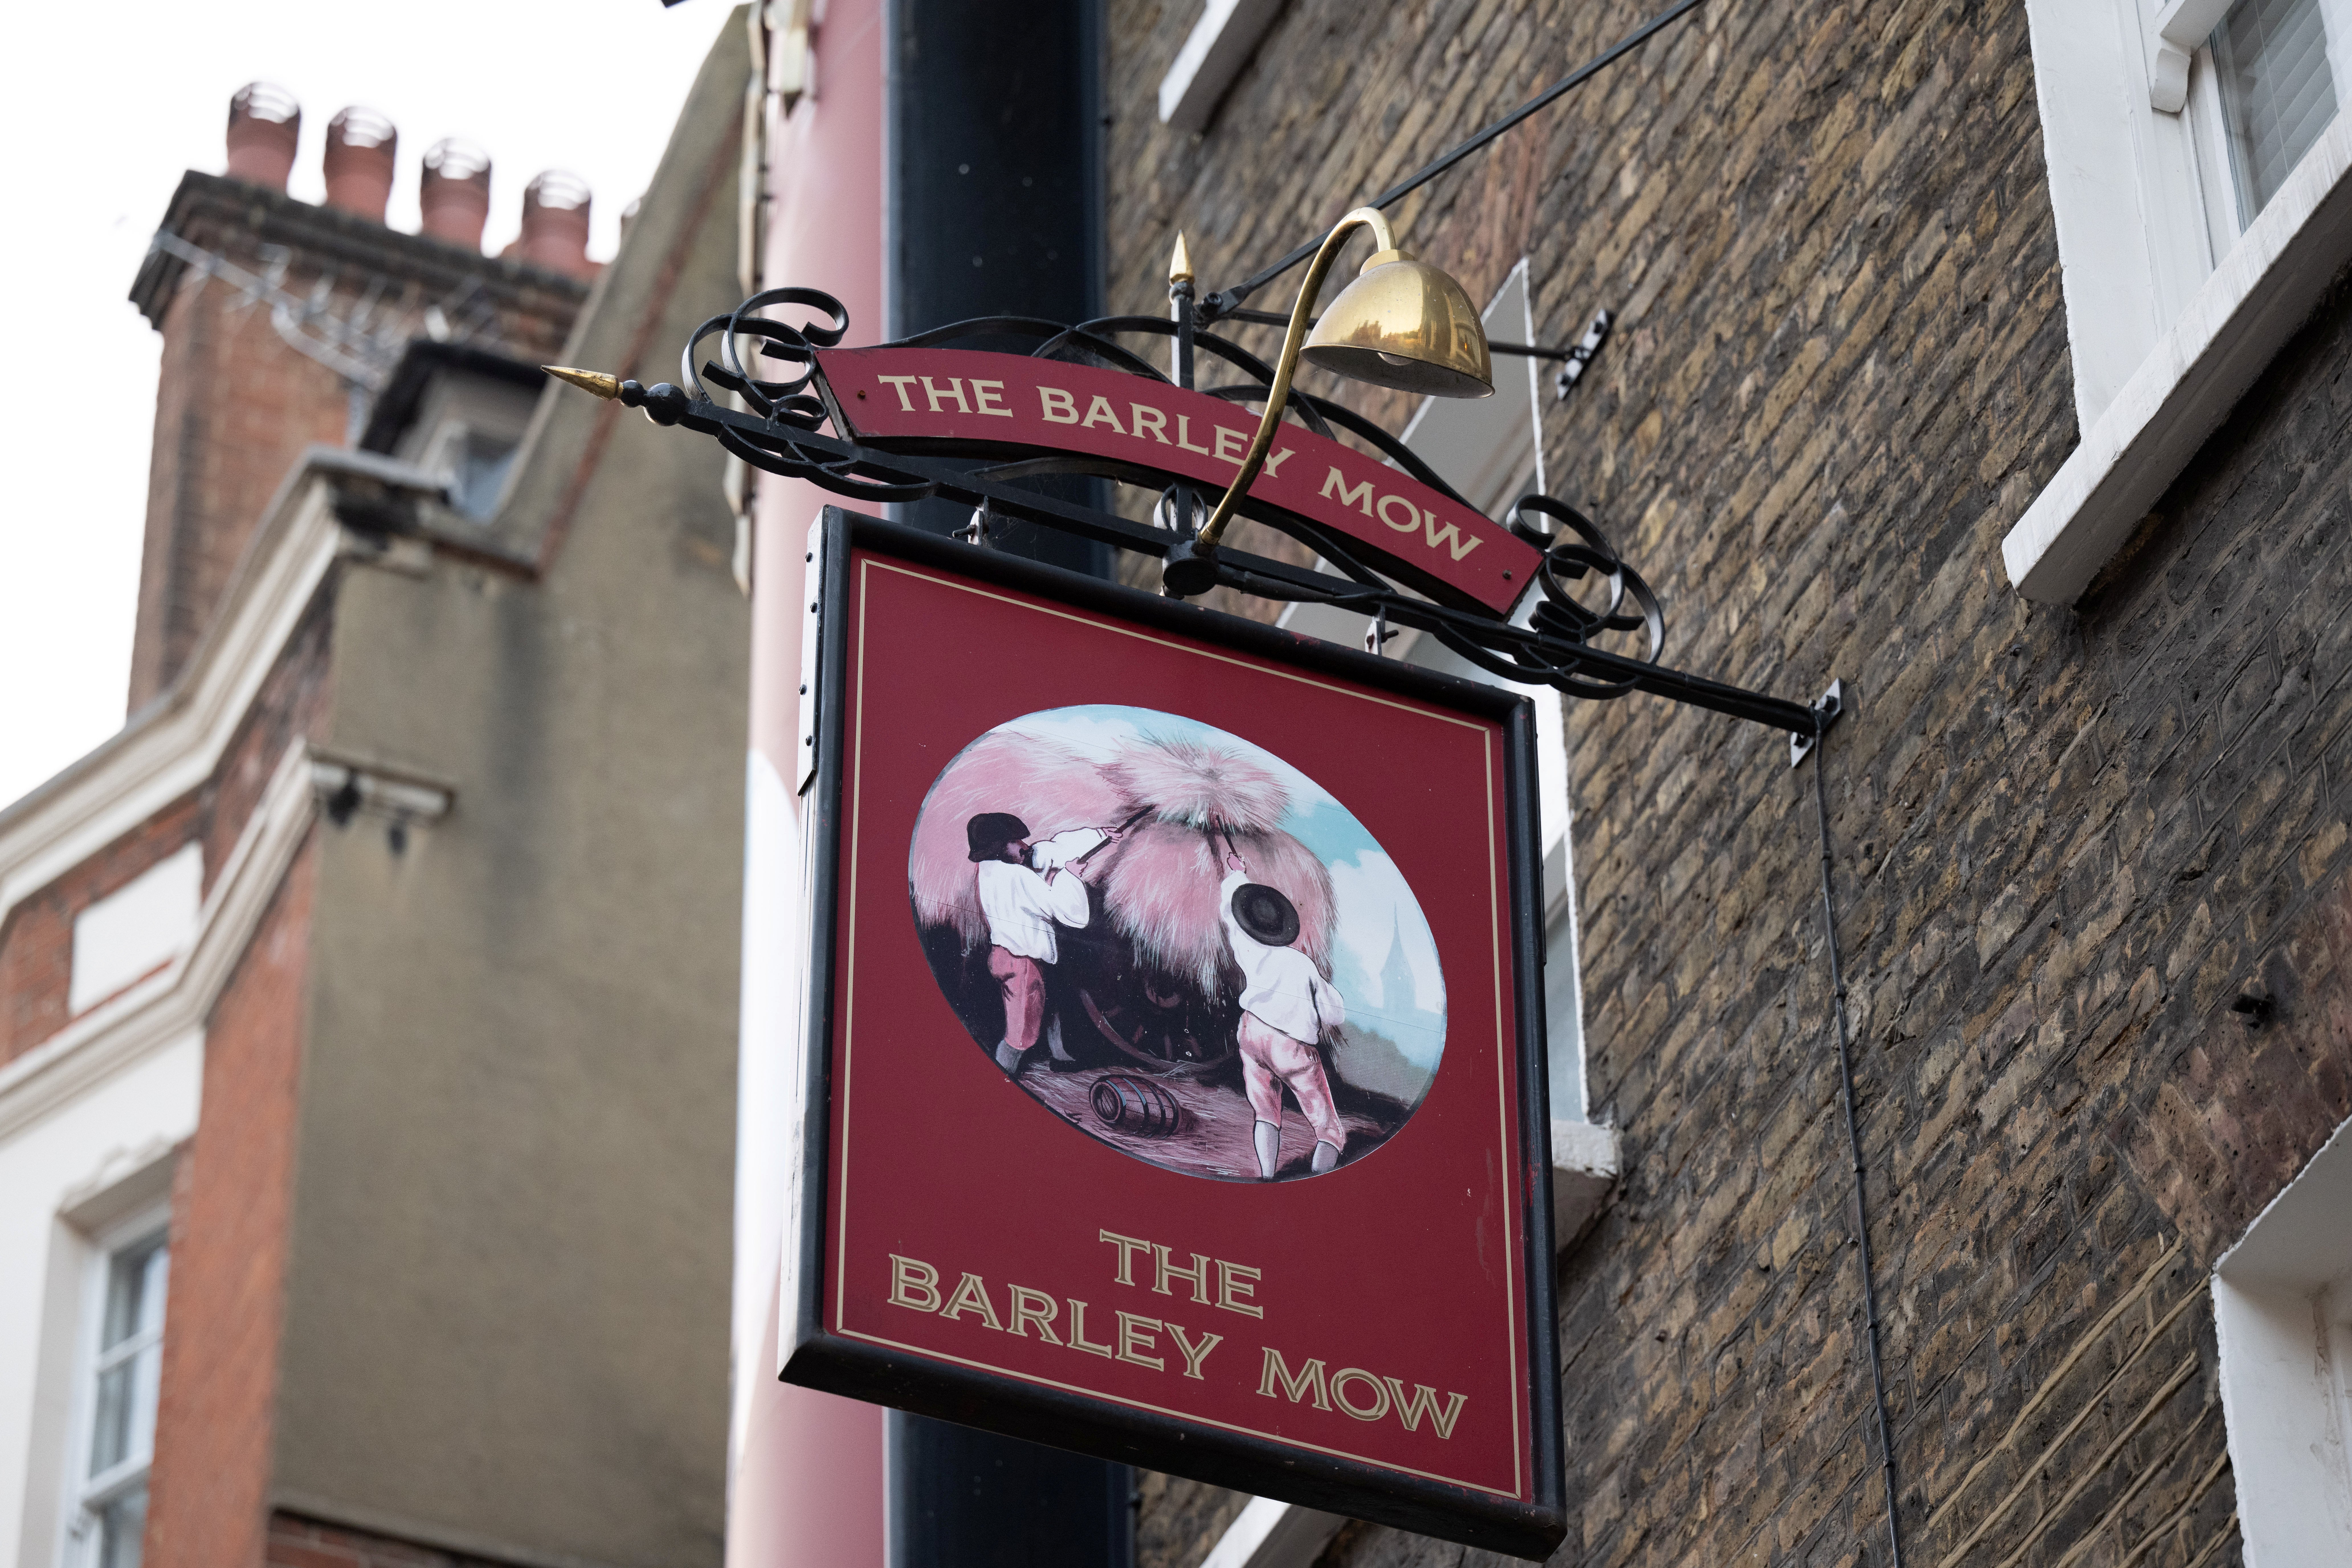 The Barley Mow in west London